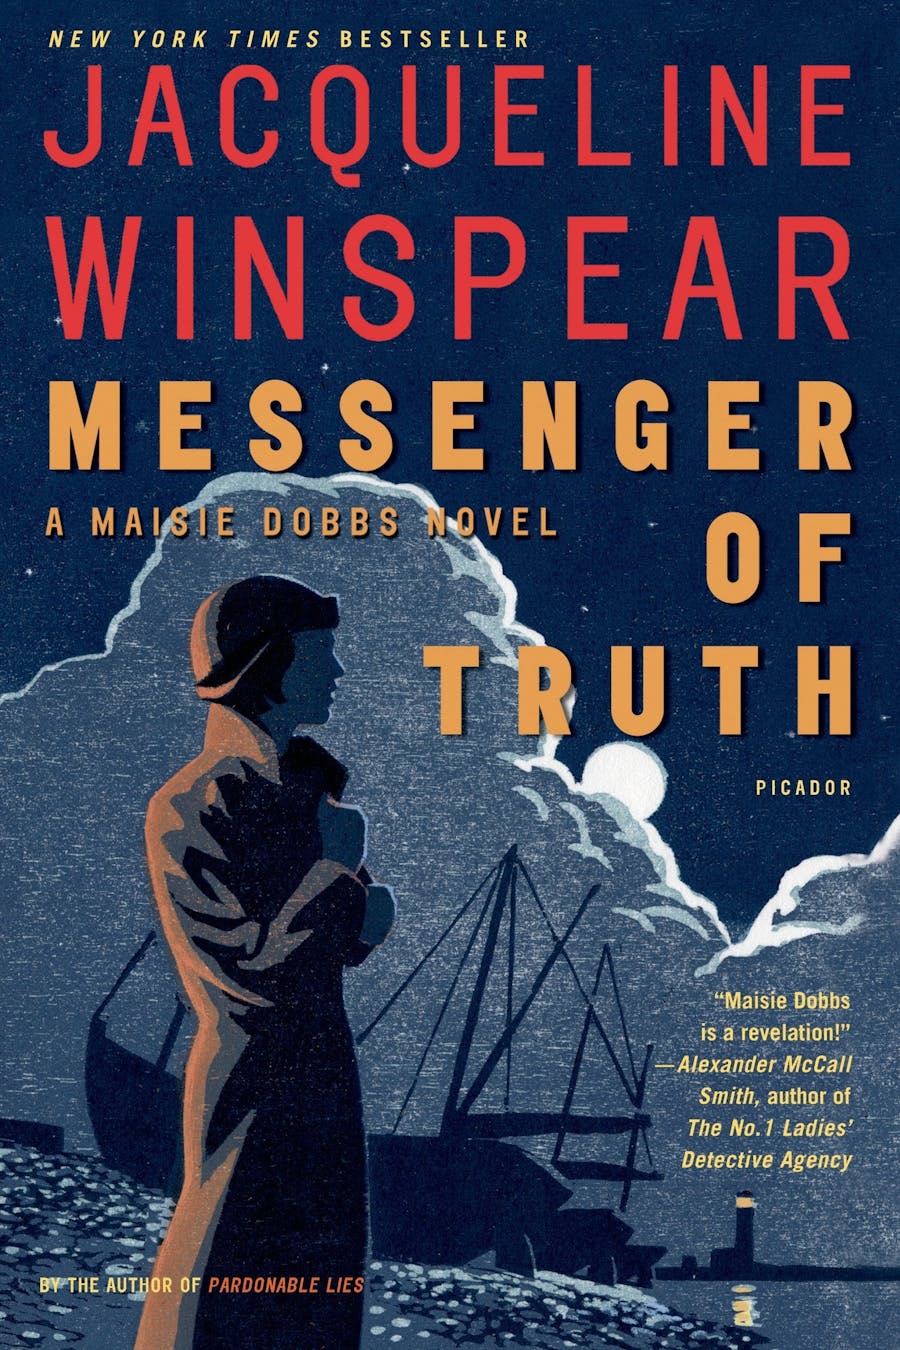 Messenger of Truth by Jacqueline Winspear